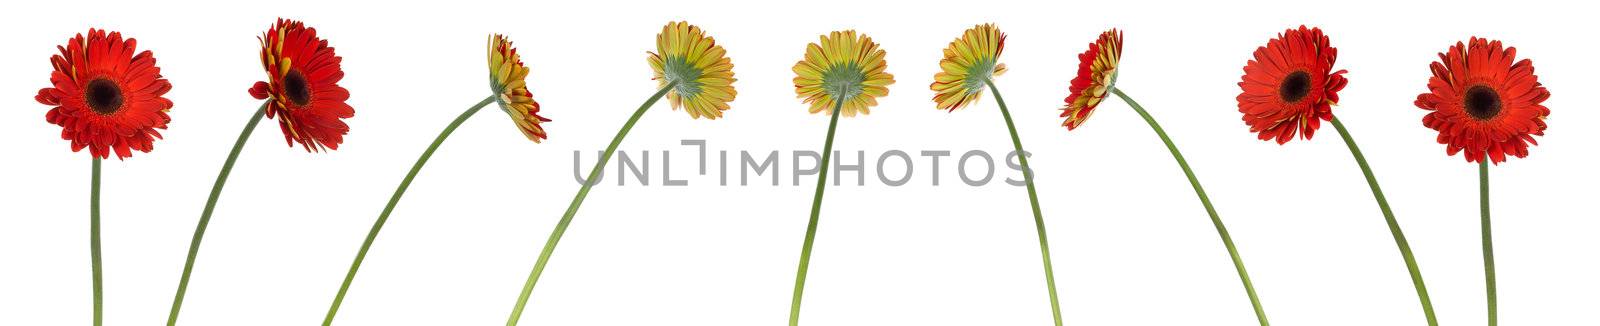 nine red gerbera flowers in different positions by Alekcey